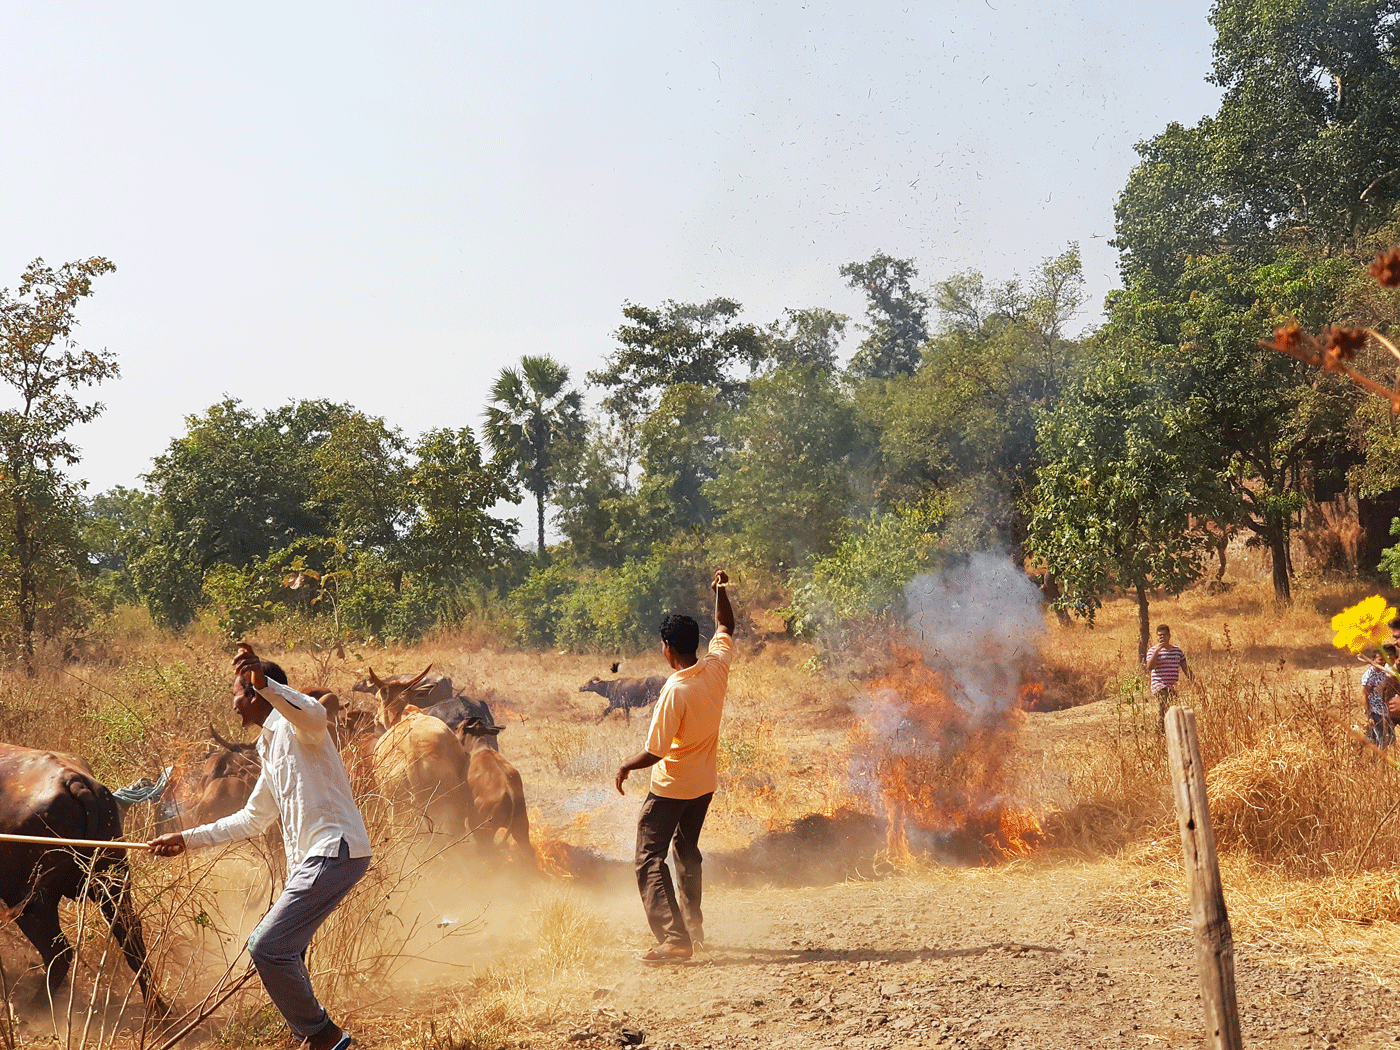 During Diwali, the Warlis perform a fire ritual where all livestock in the hamlet are rapidly led to step through a paddy-straw fire lit by the community